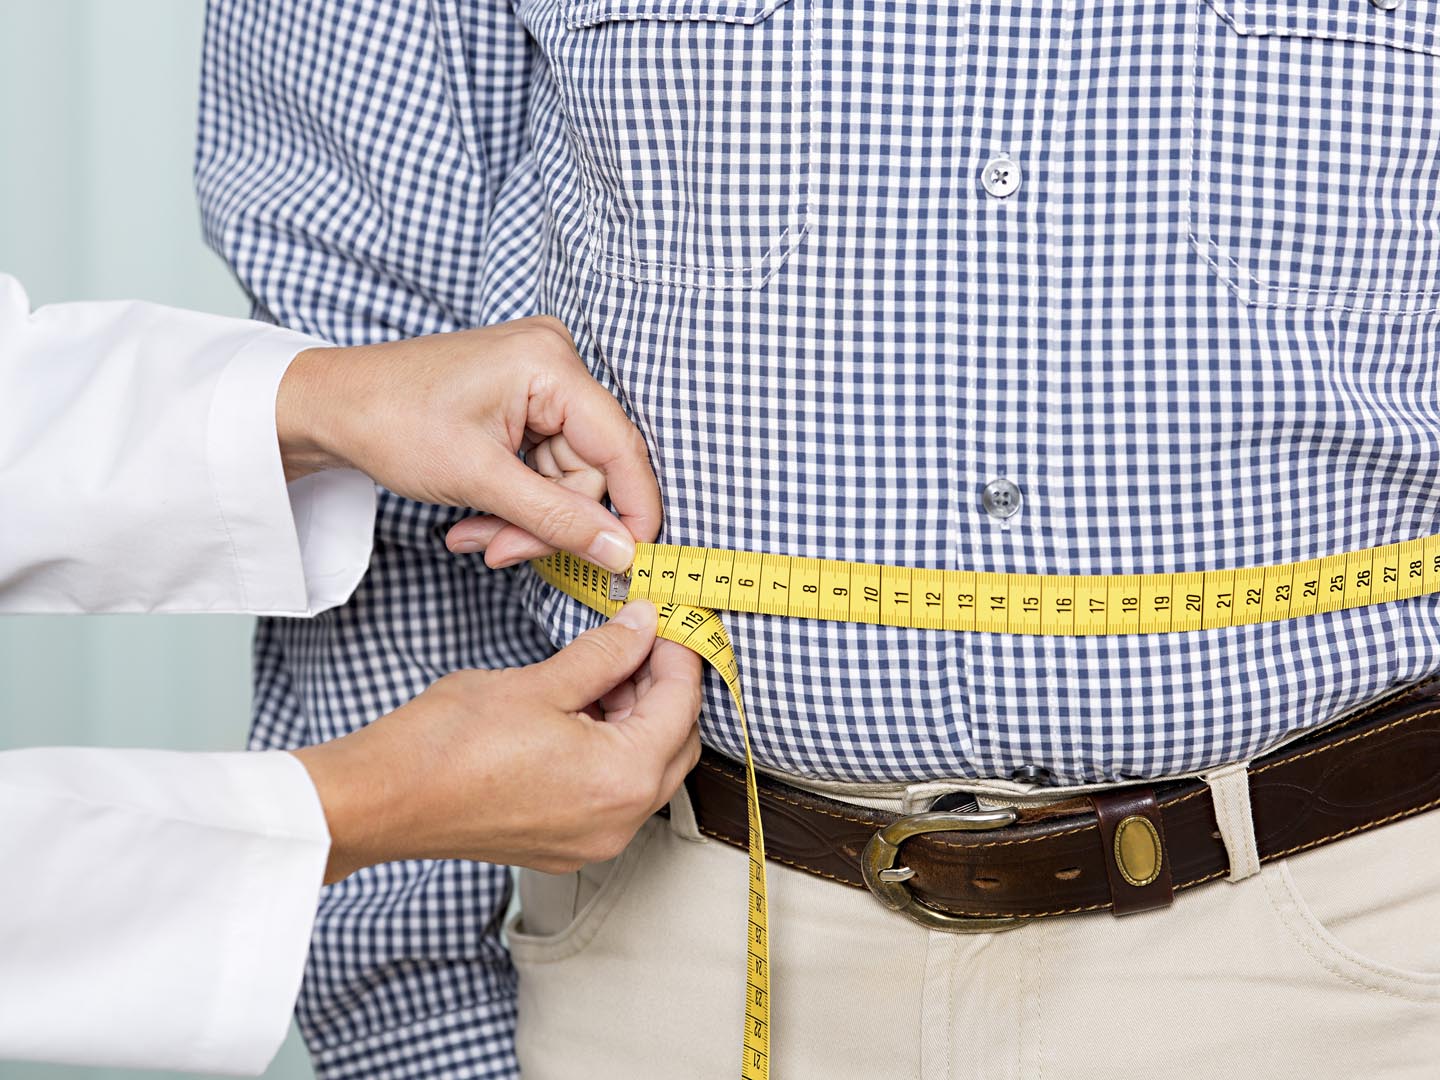 Medical examination: doctor measures overweight